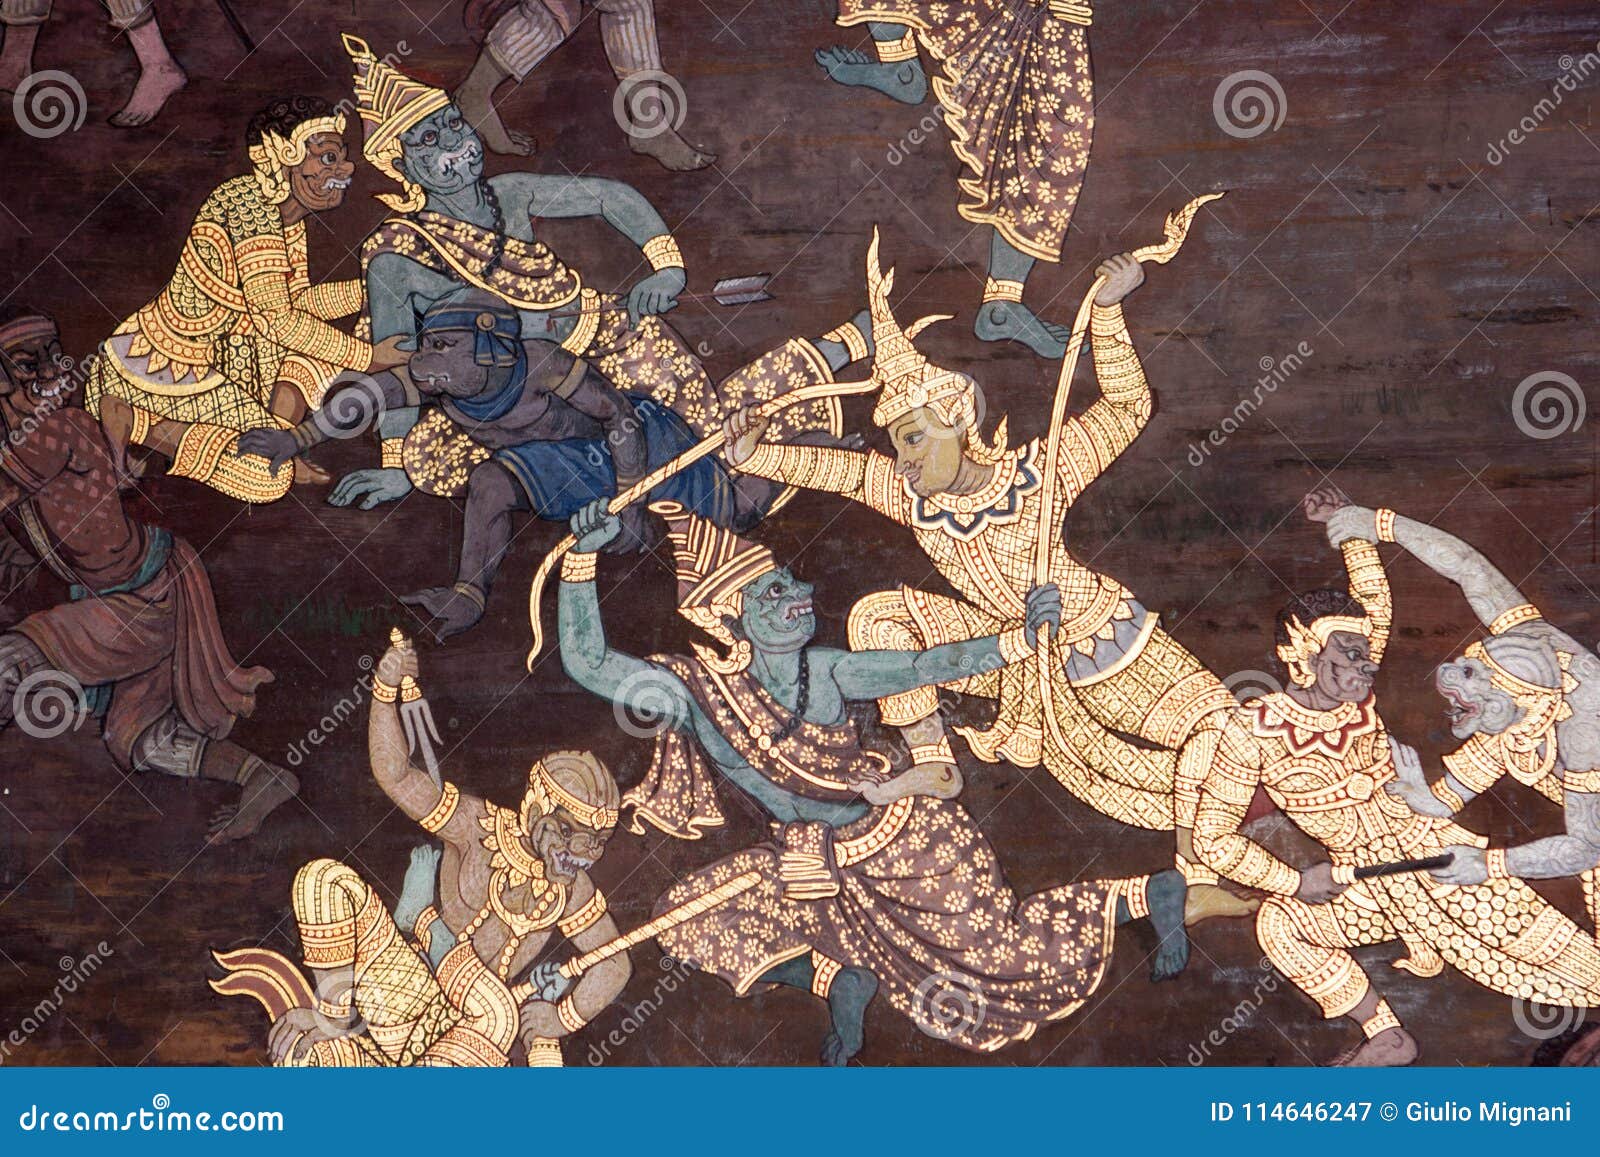 wall paintings depicting the myth of ramakien in the wat phra kaew palace, also known as the emerald buddha temple. bangkok, thail